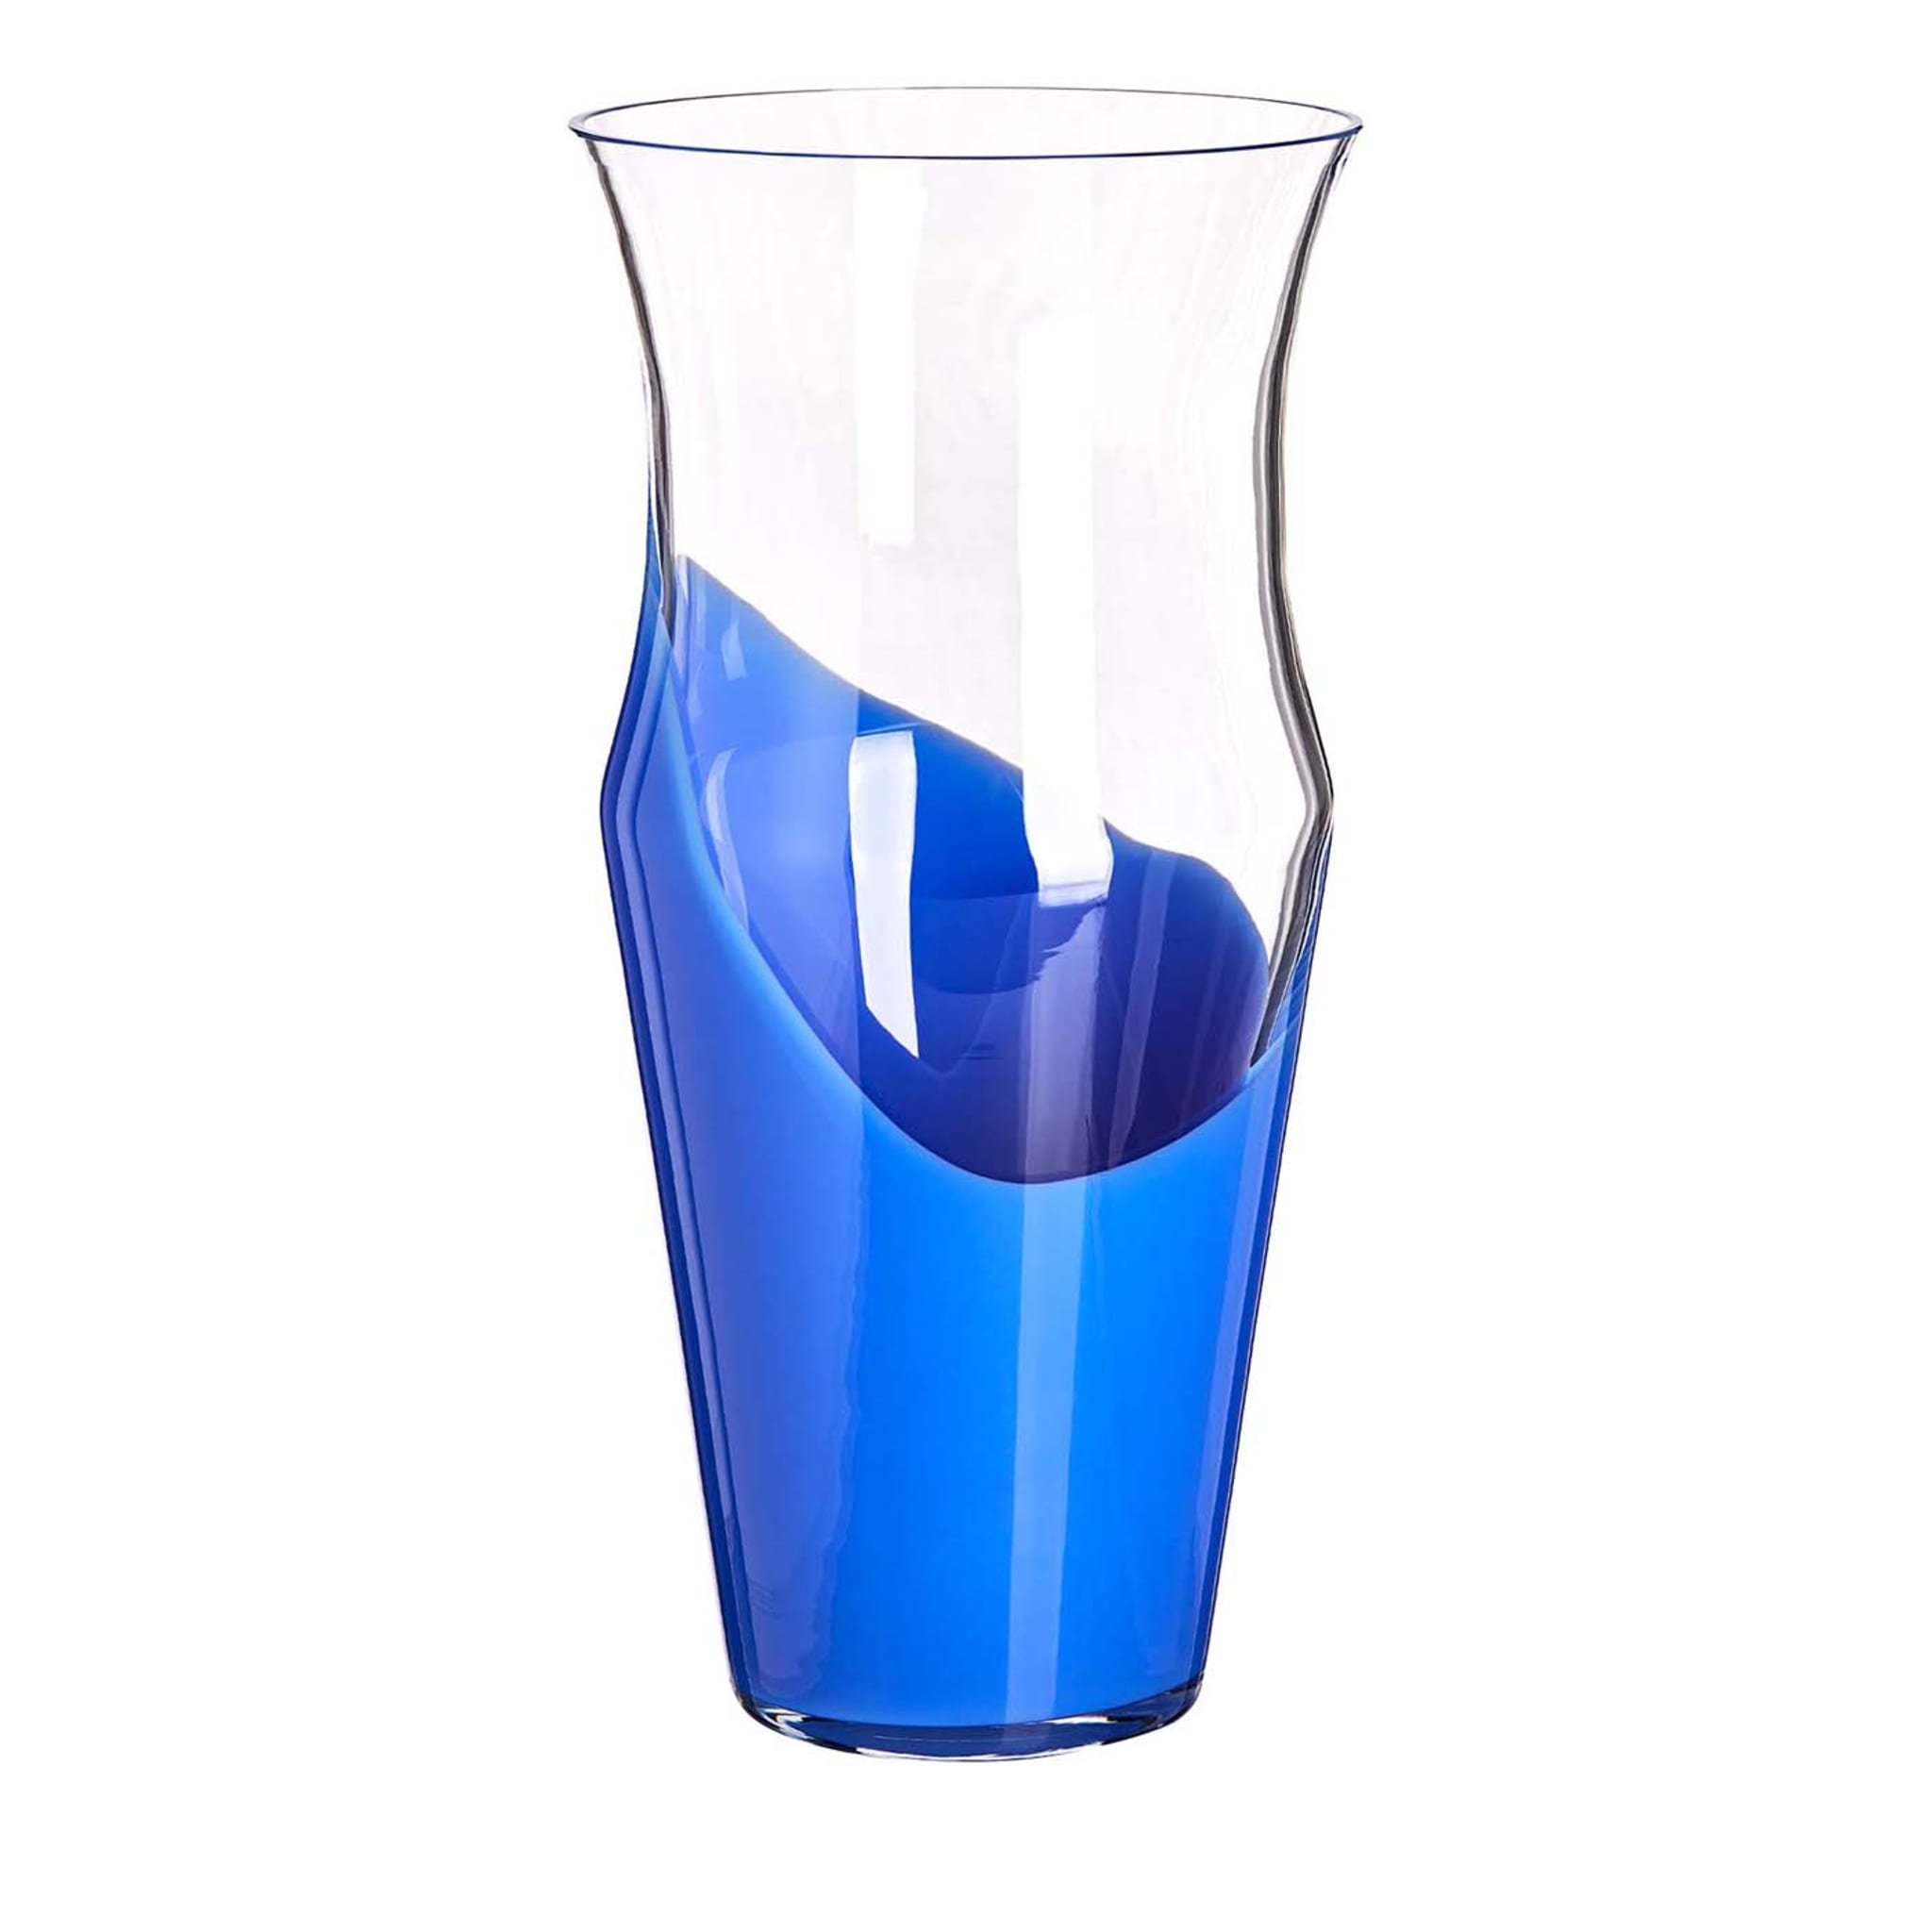 Monocromo Blue and Transparent Vase by Carlo Moretti - Main view